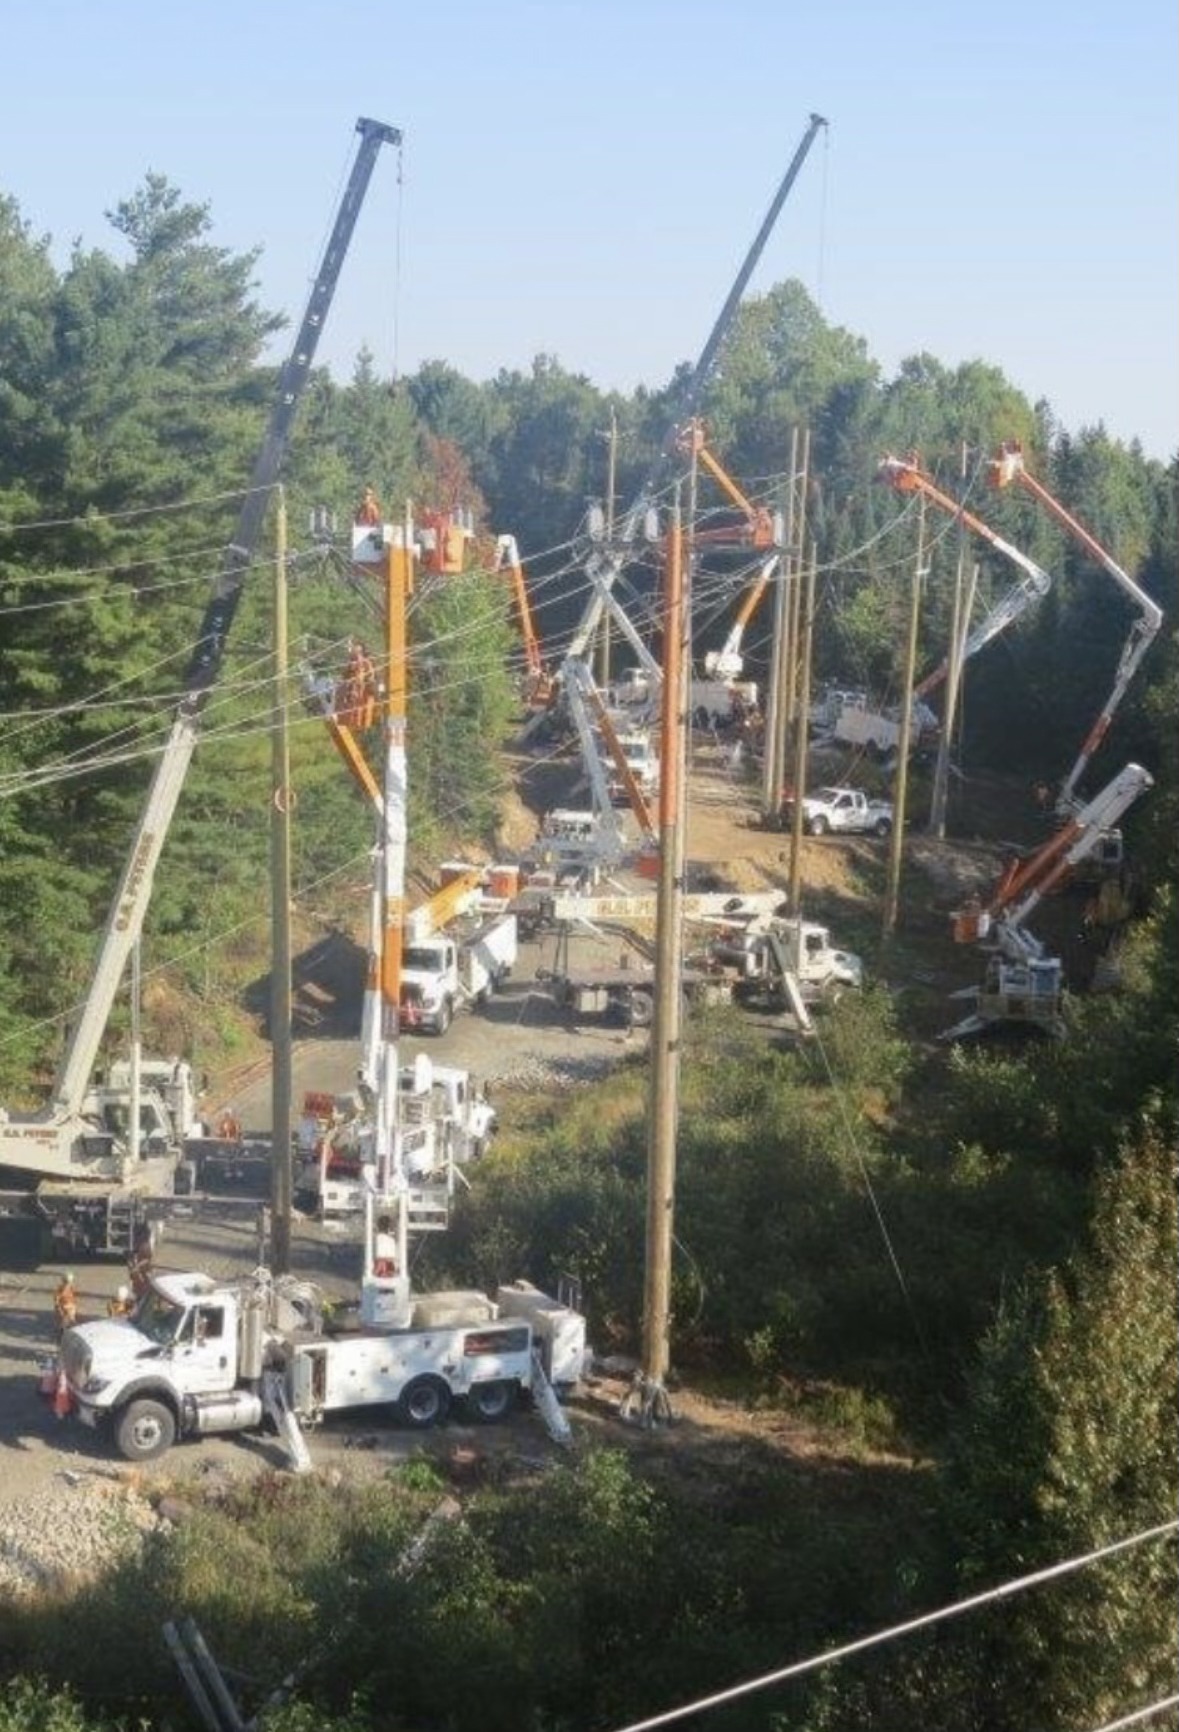 Aerial view of an outdoor industrial site with multiple utility vehicles and cranes, people working on electrical poles amidst forested area.